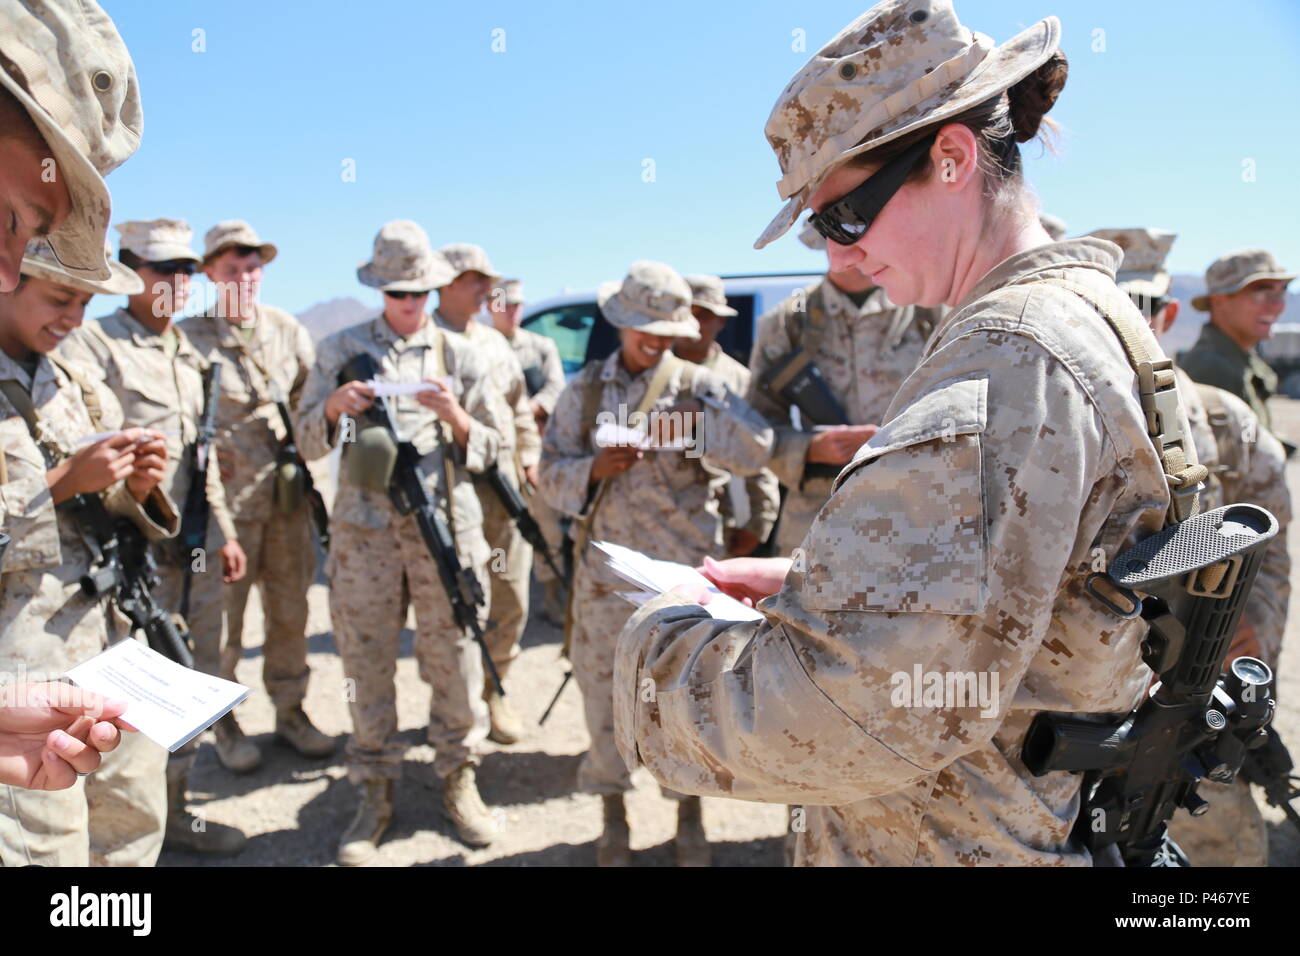 First Lt. Alyssa Renosto disributes papers with designated roles and a scenario for an evacuation control center operations rehearsal during the 11th Marine Expeditionary Unit’s Combined Arms Exercise at Marine Corps Air Ground Combat Center Twentynine Palms, Calif., June 12, 2016. The MEU’s logistics element performs a variety of duties beyond supplying beans, bullets and band aids. Among its other capabilities, the logistics element can plan, brief and execute ECC missions. This consists of the processing and screening of individuals and other logistics functions associated with emergency no Stock Photo